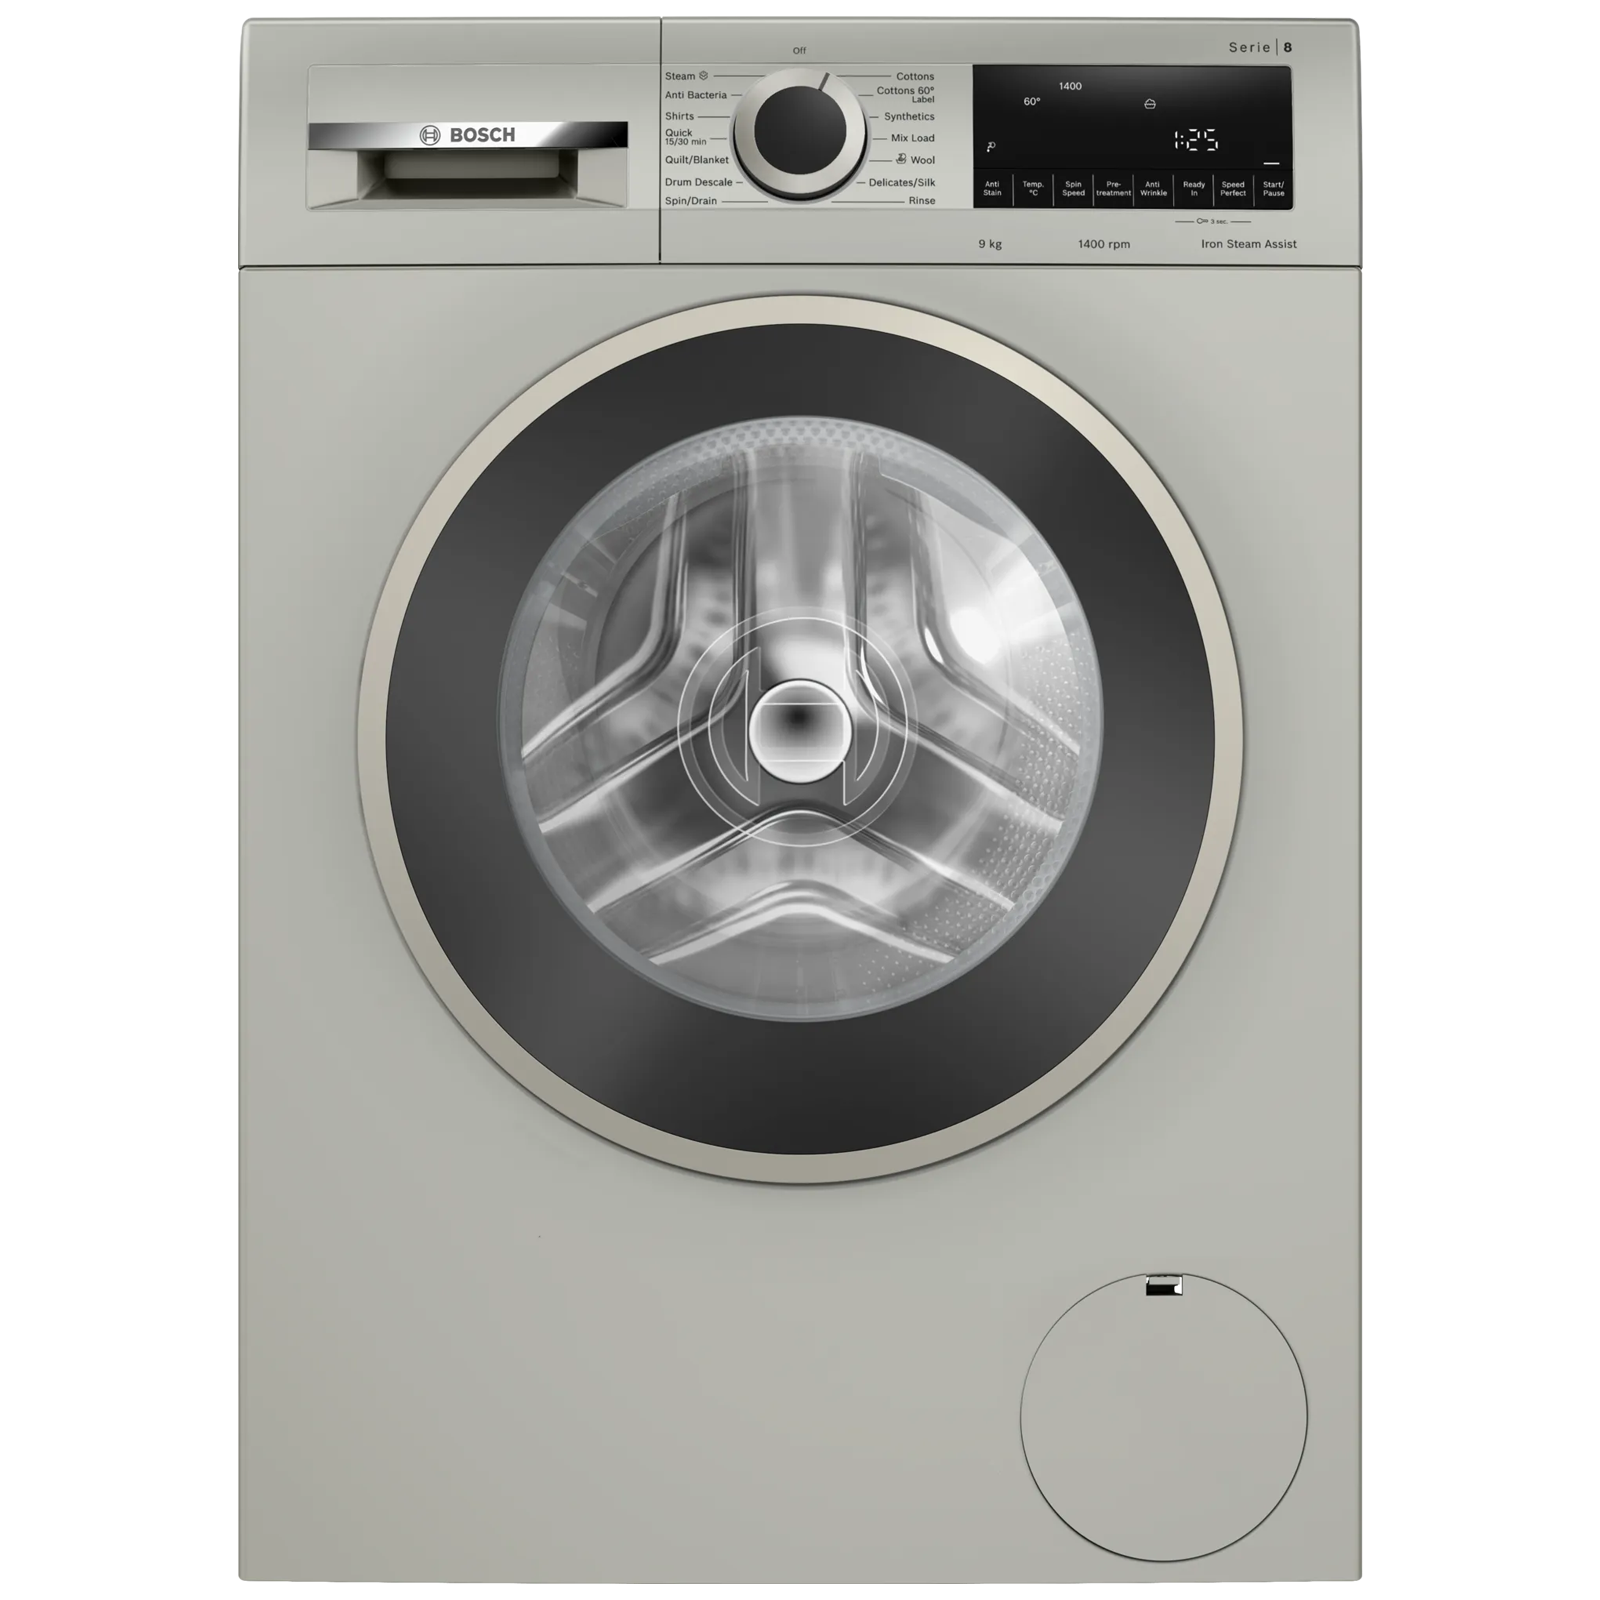 BOSCH 9 kg Fully Automatic Front Load Washing Machine (Series 8, WGA1440XIN, Multiple Water Protection, Silver Inox)